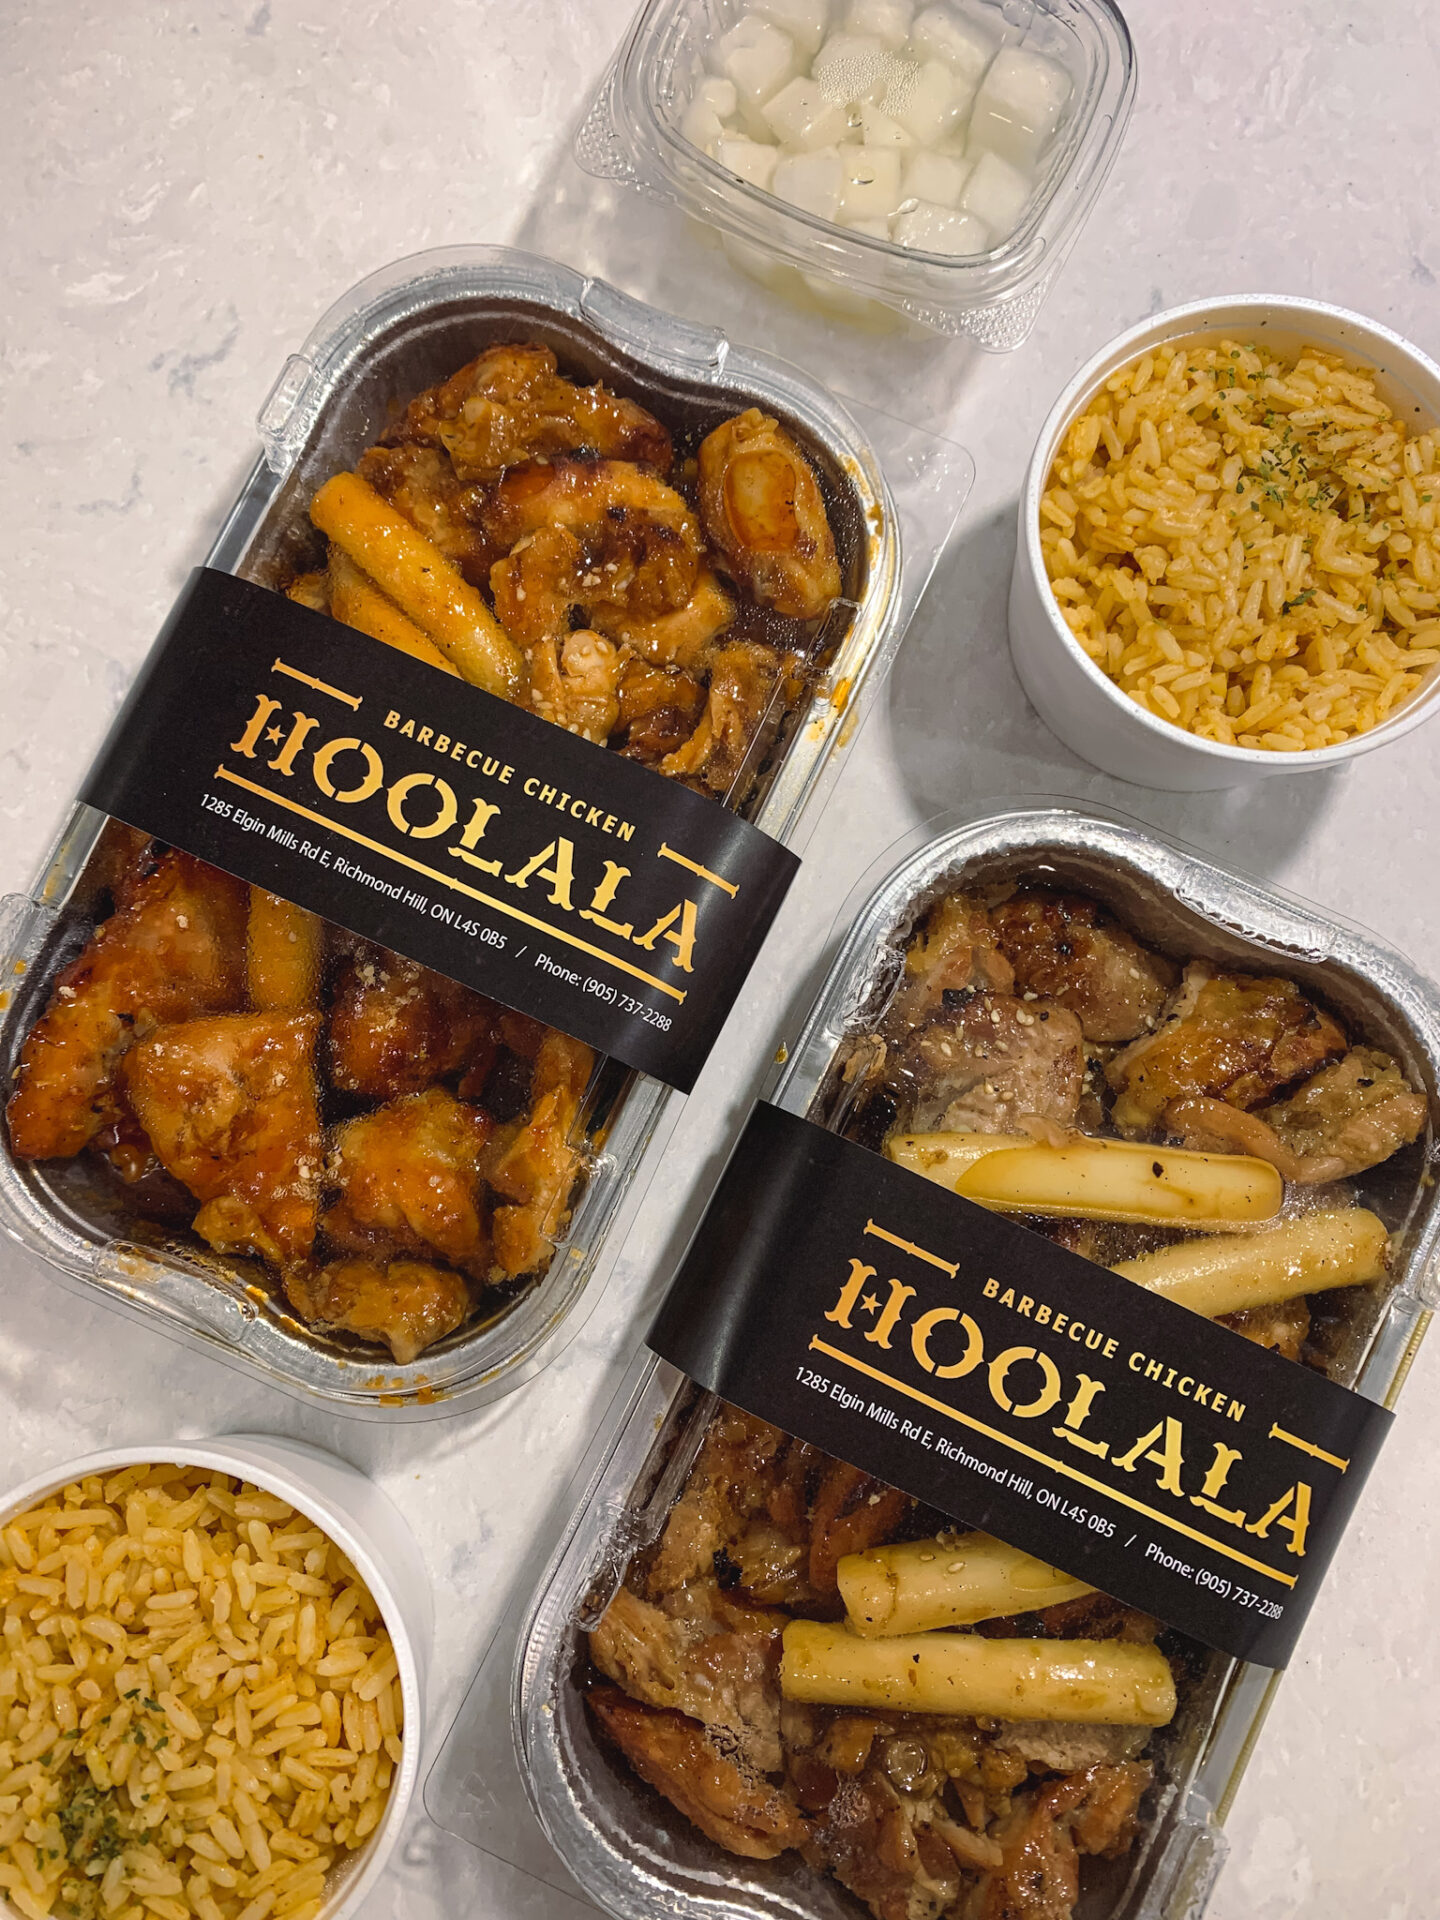 Korean-style charcoal-grilled chicken from Hoolala Chicken in Richmond Hill, Ontario